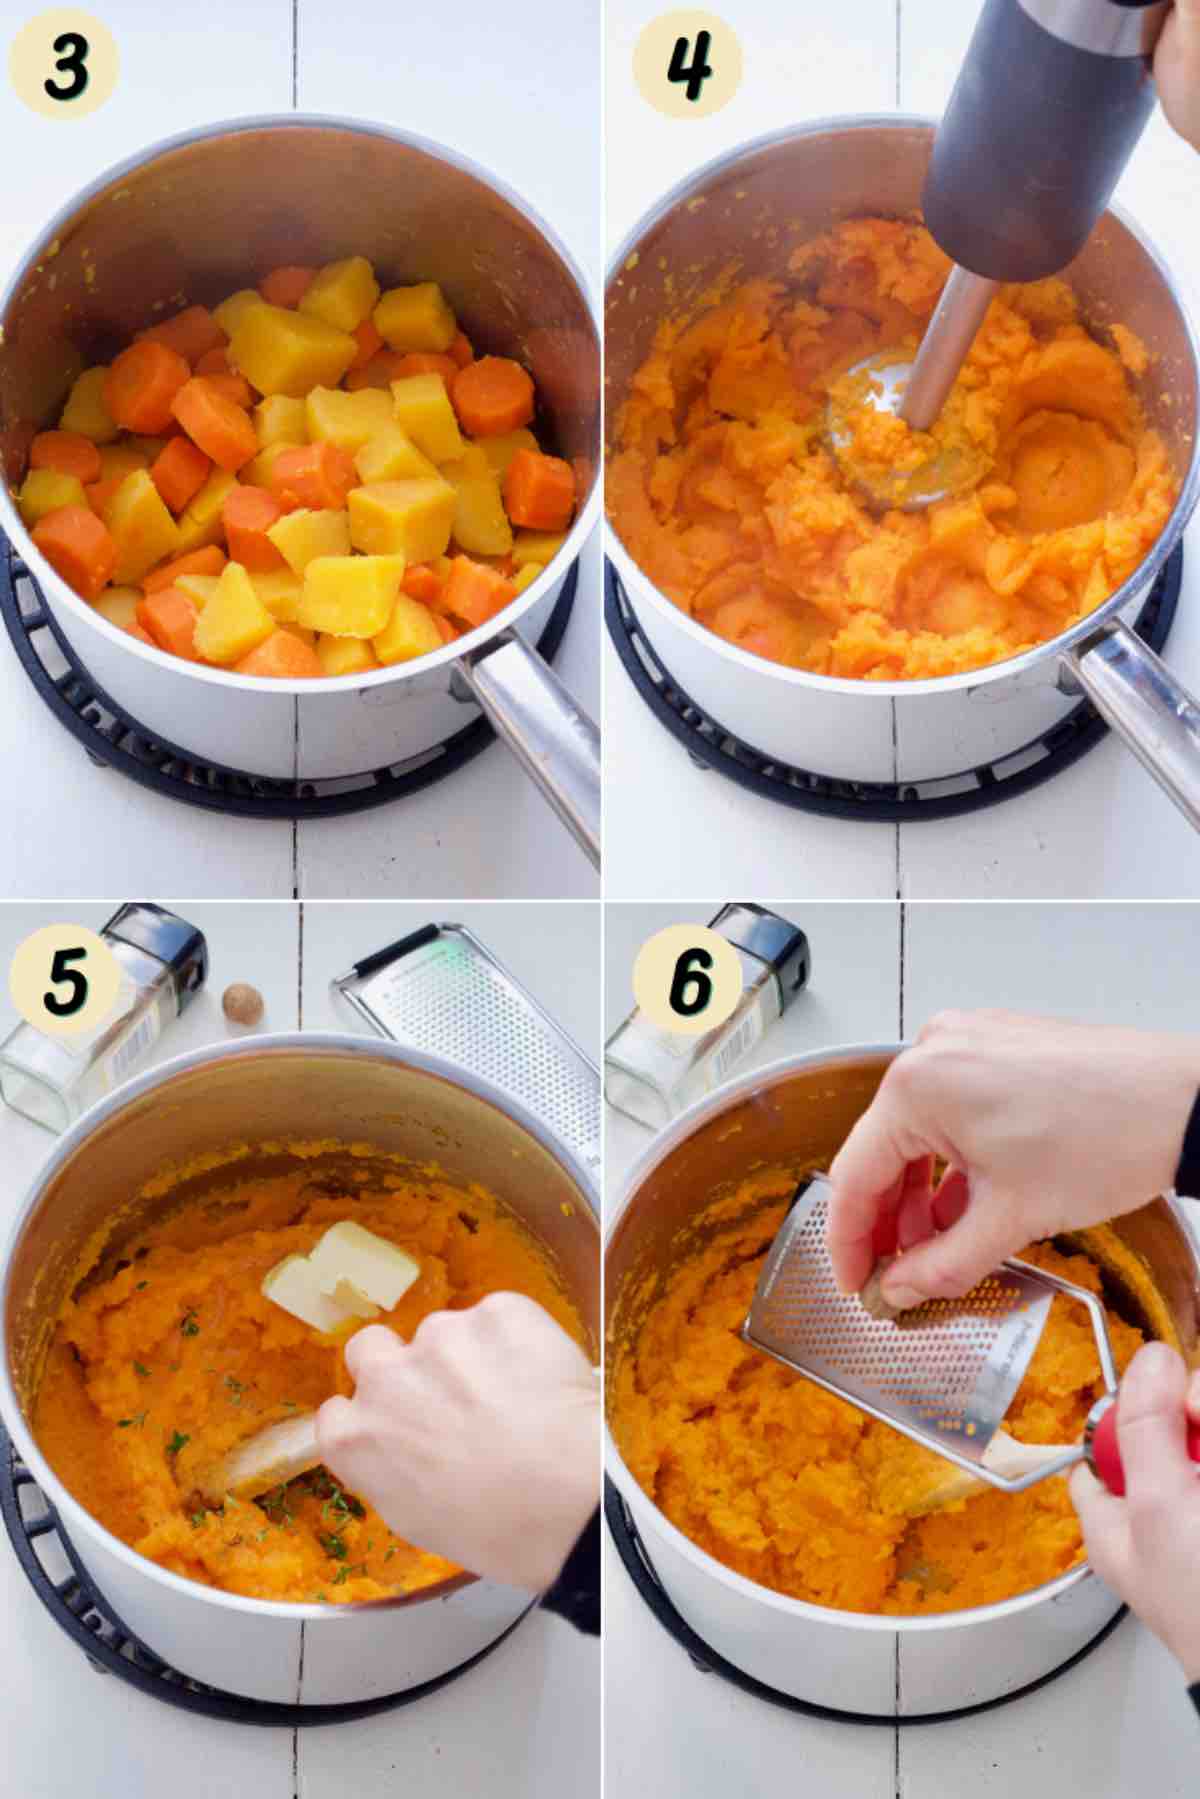 Process of making carrot and swede mash.